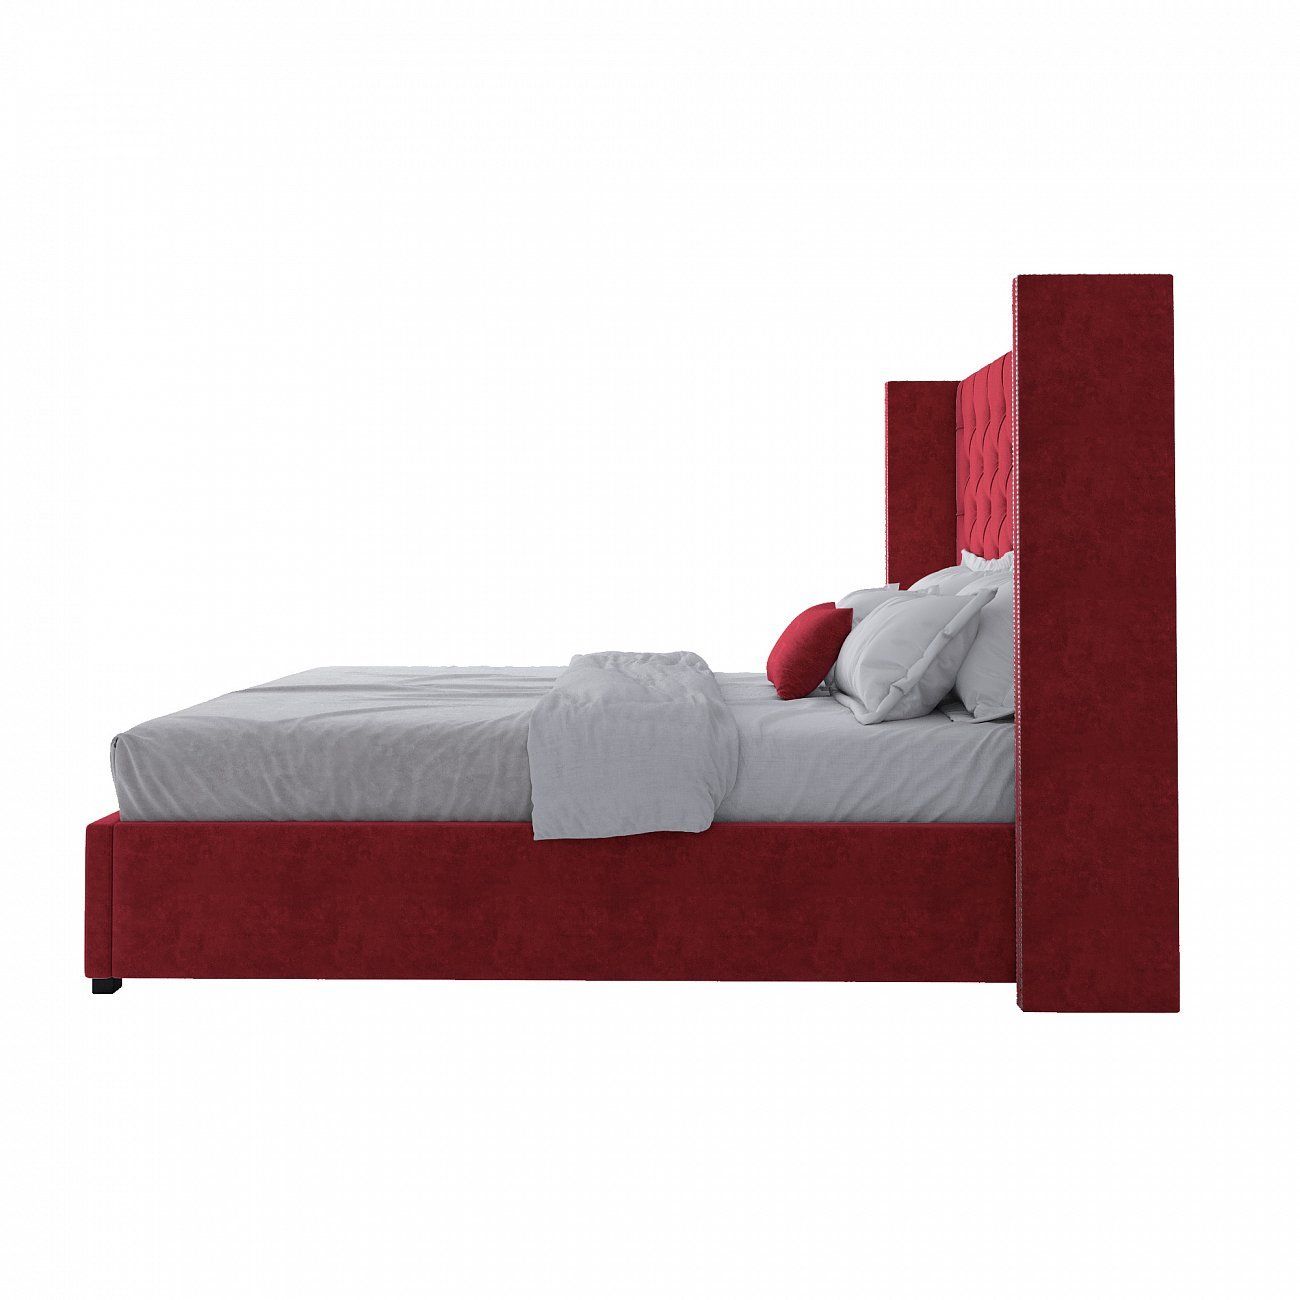 Double bed with upholstered headboard 160x200 cm red Wing